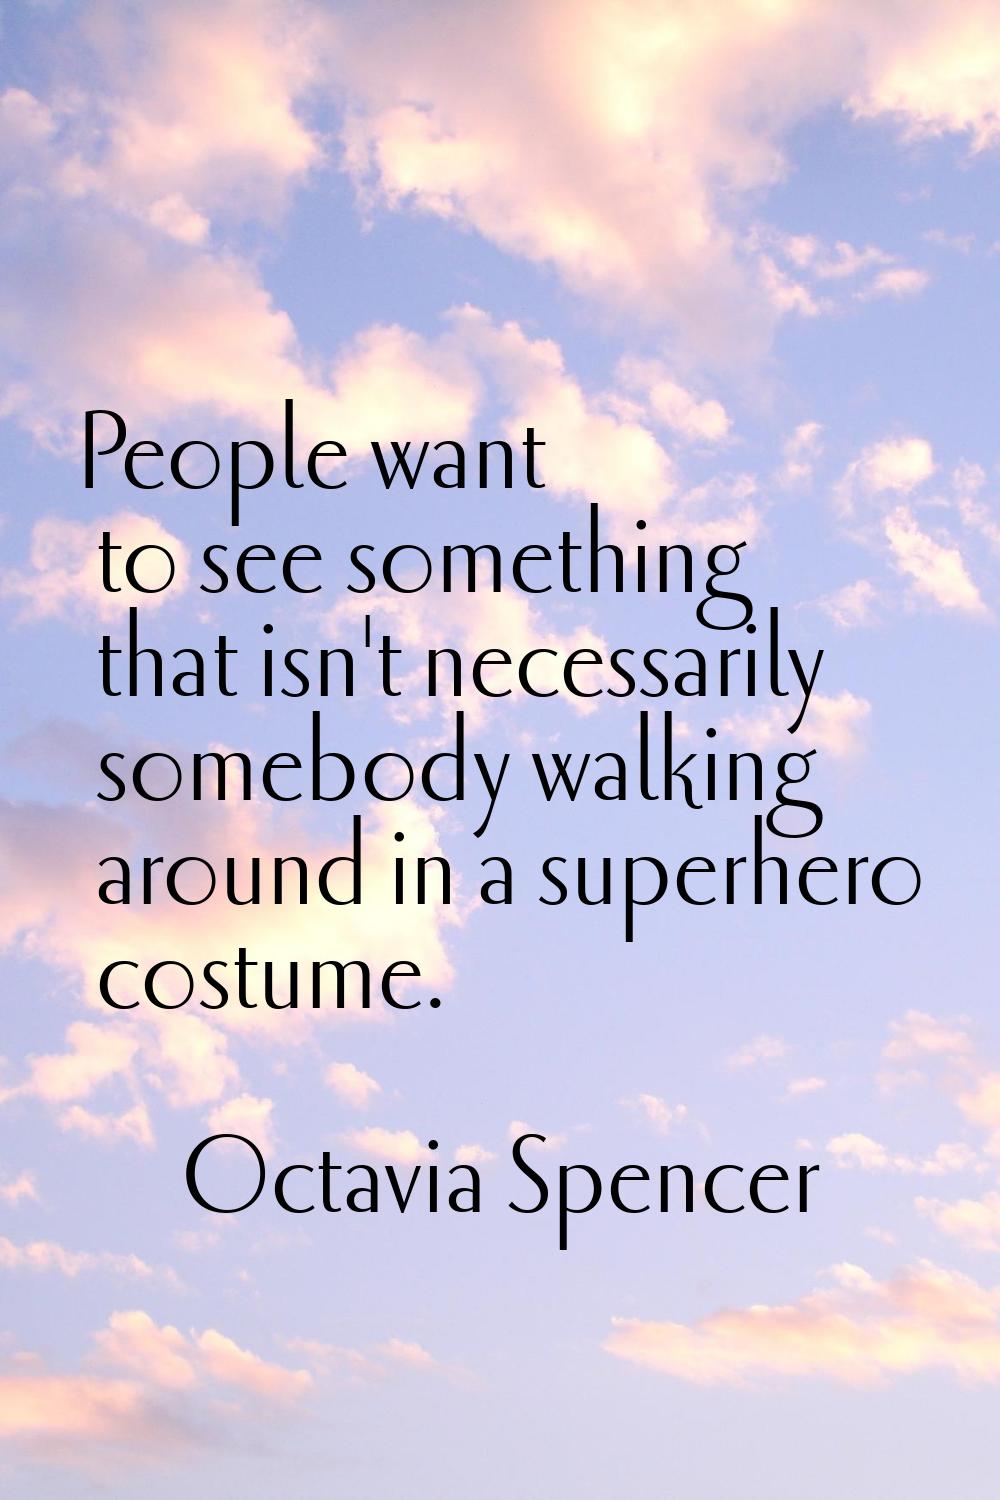 People want to see something that isn't necessarily somebody walking around in a superhero costume.